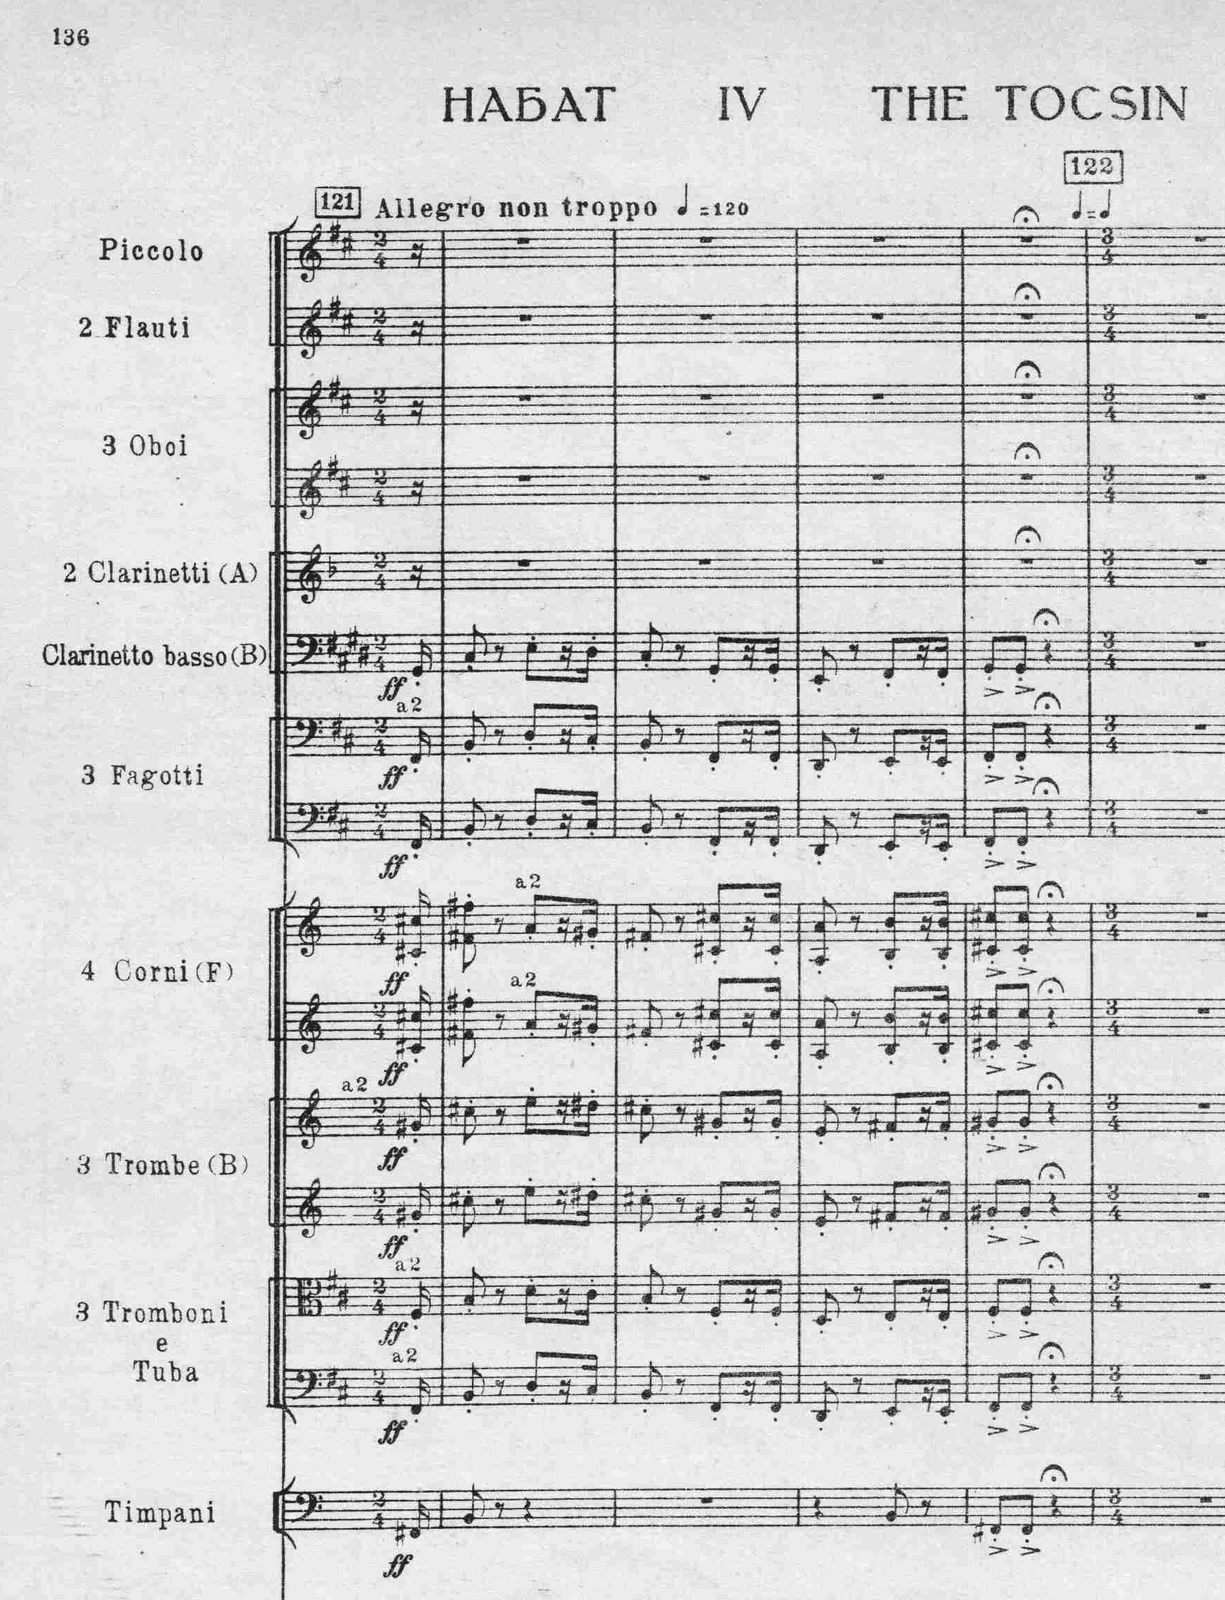 Beginning of the fourth movement in the score. The “Rage, Tyrants!” theme is played.